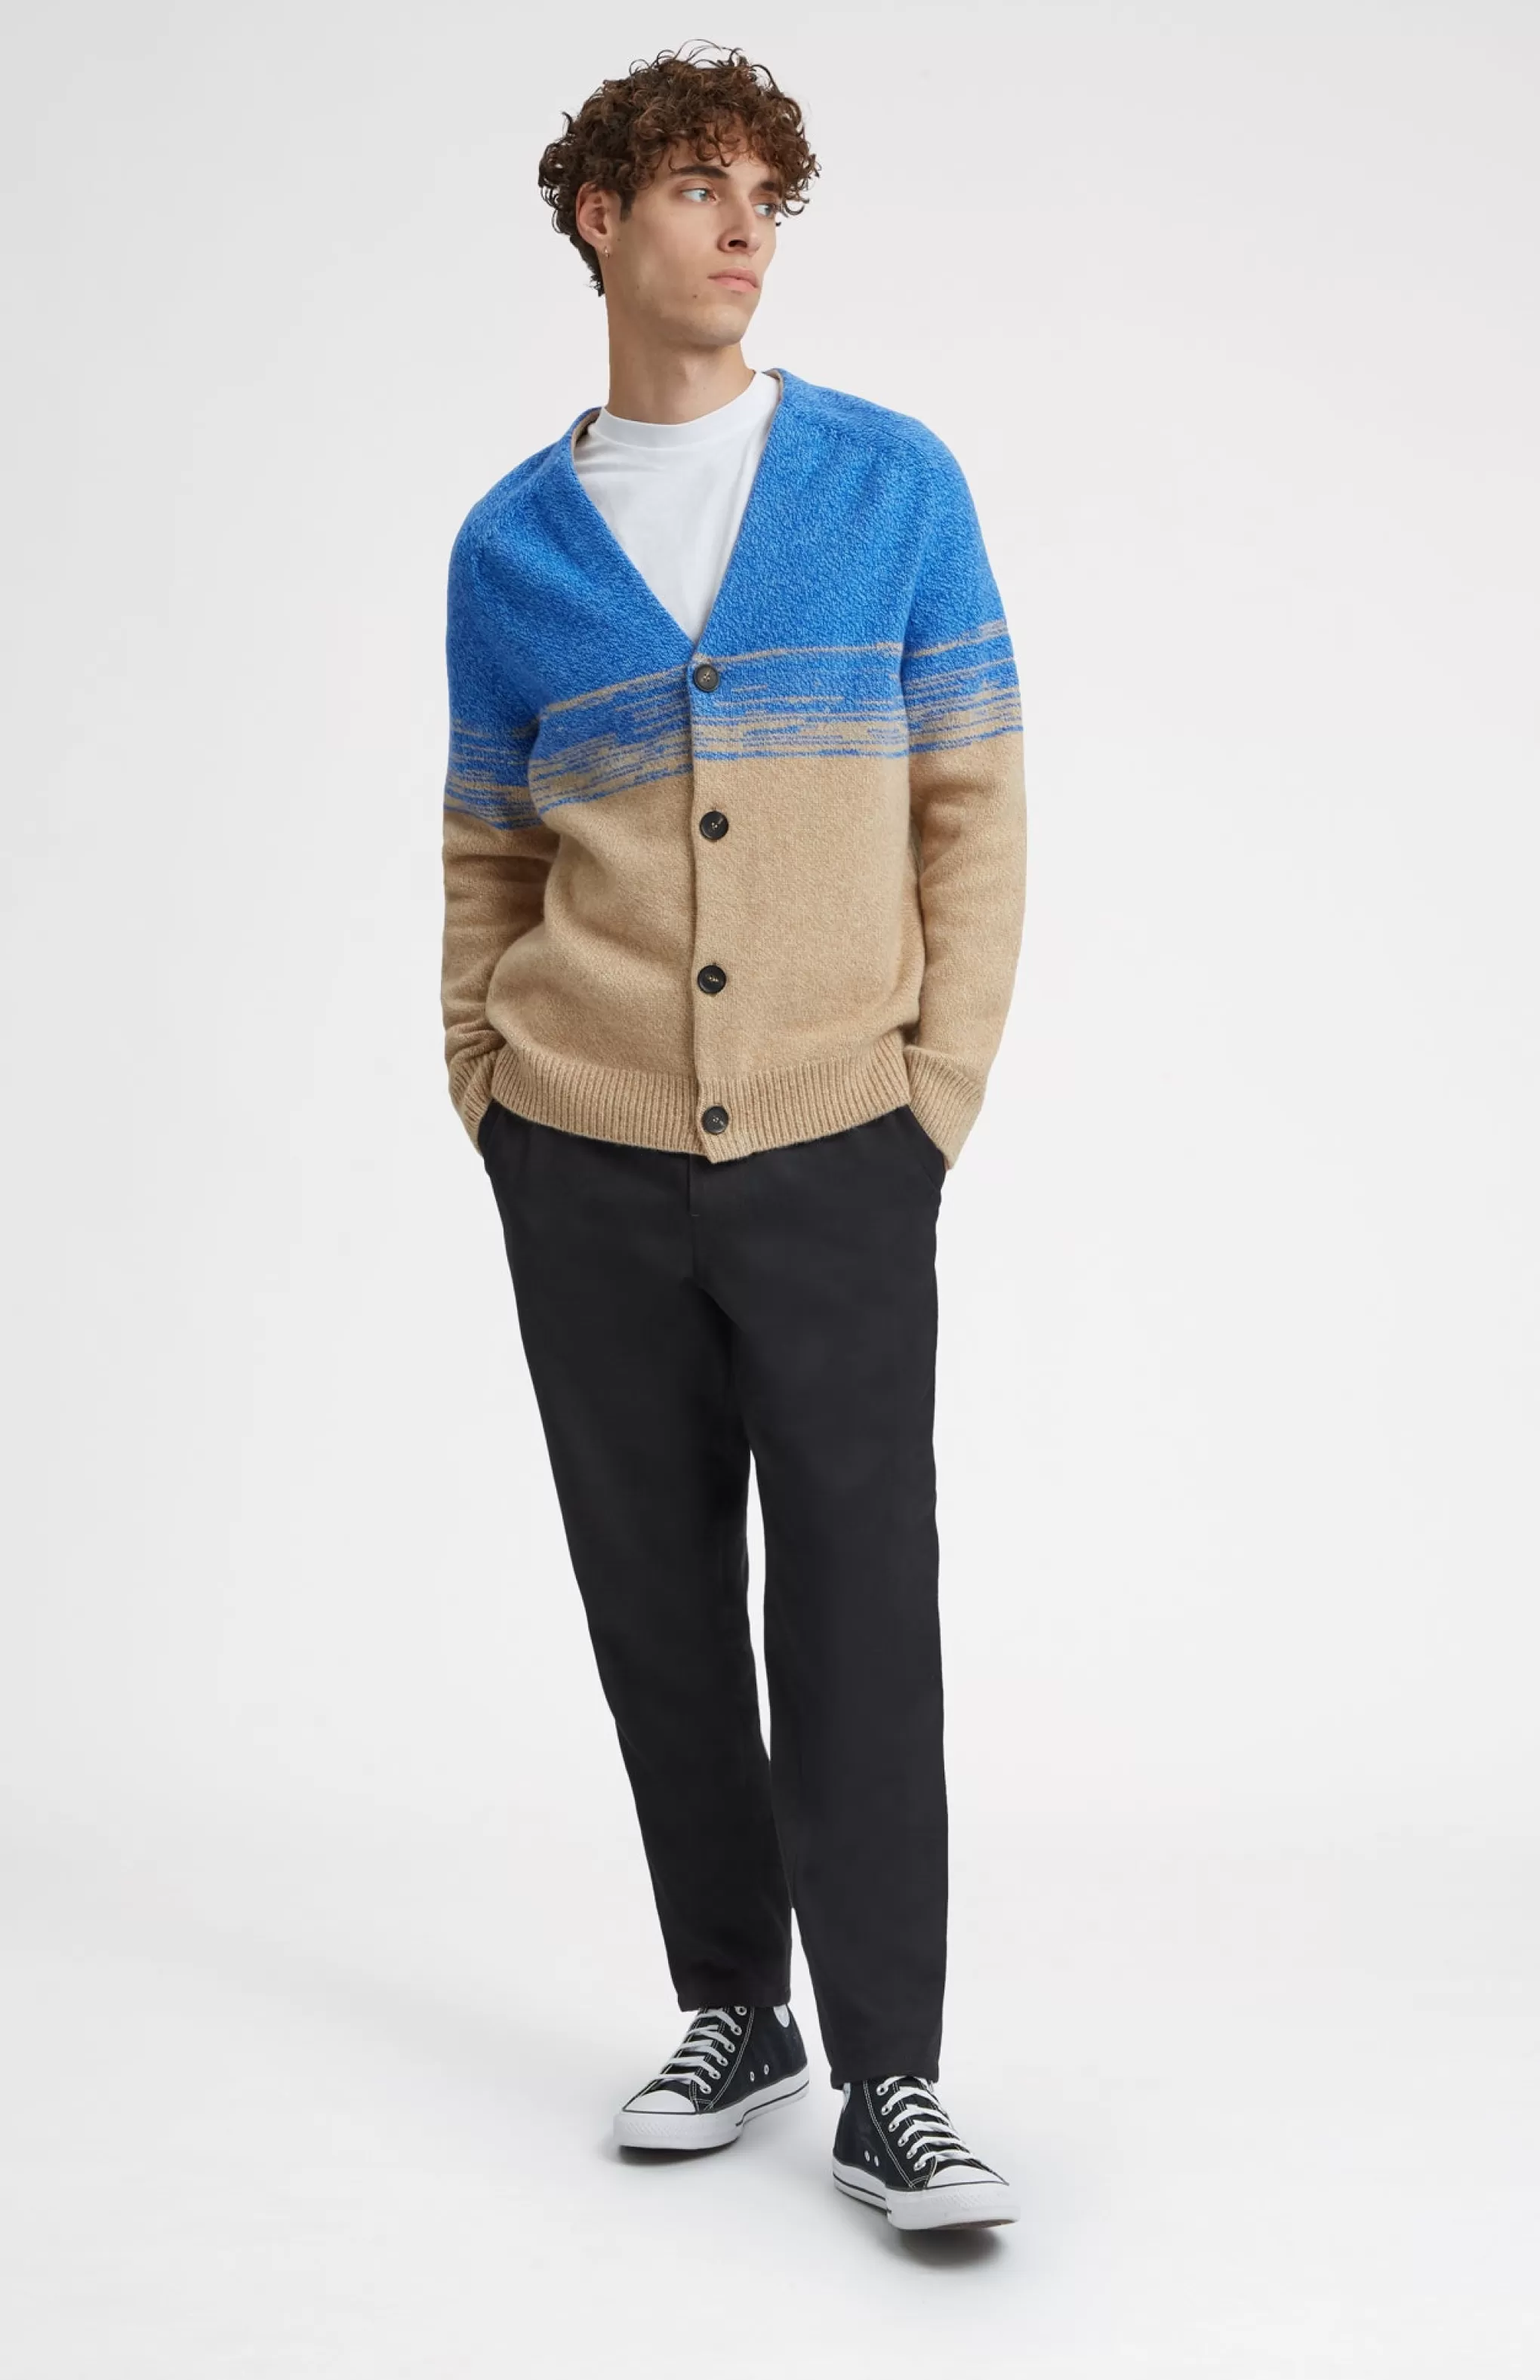 Cheap V Neck Lambswool Cardigan With Degrade Effect In Cobalt And Camel Men Cardigans